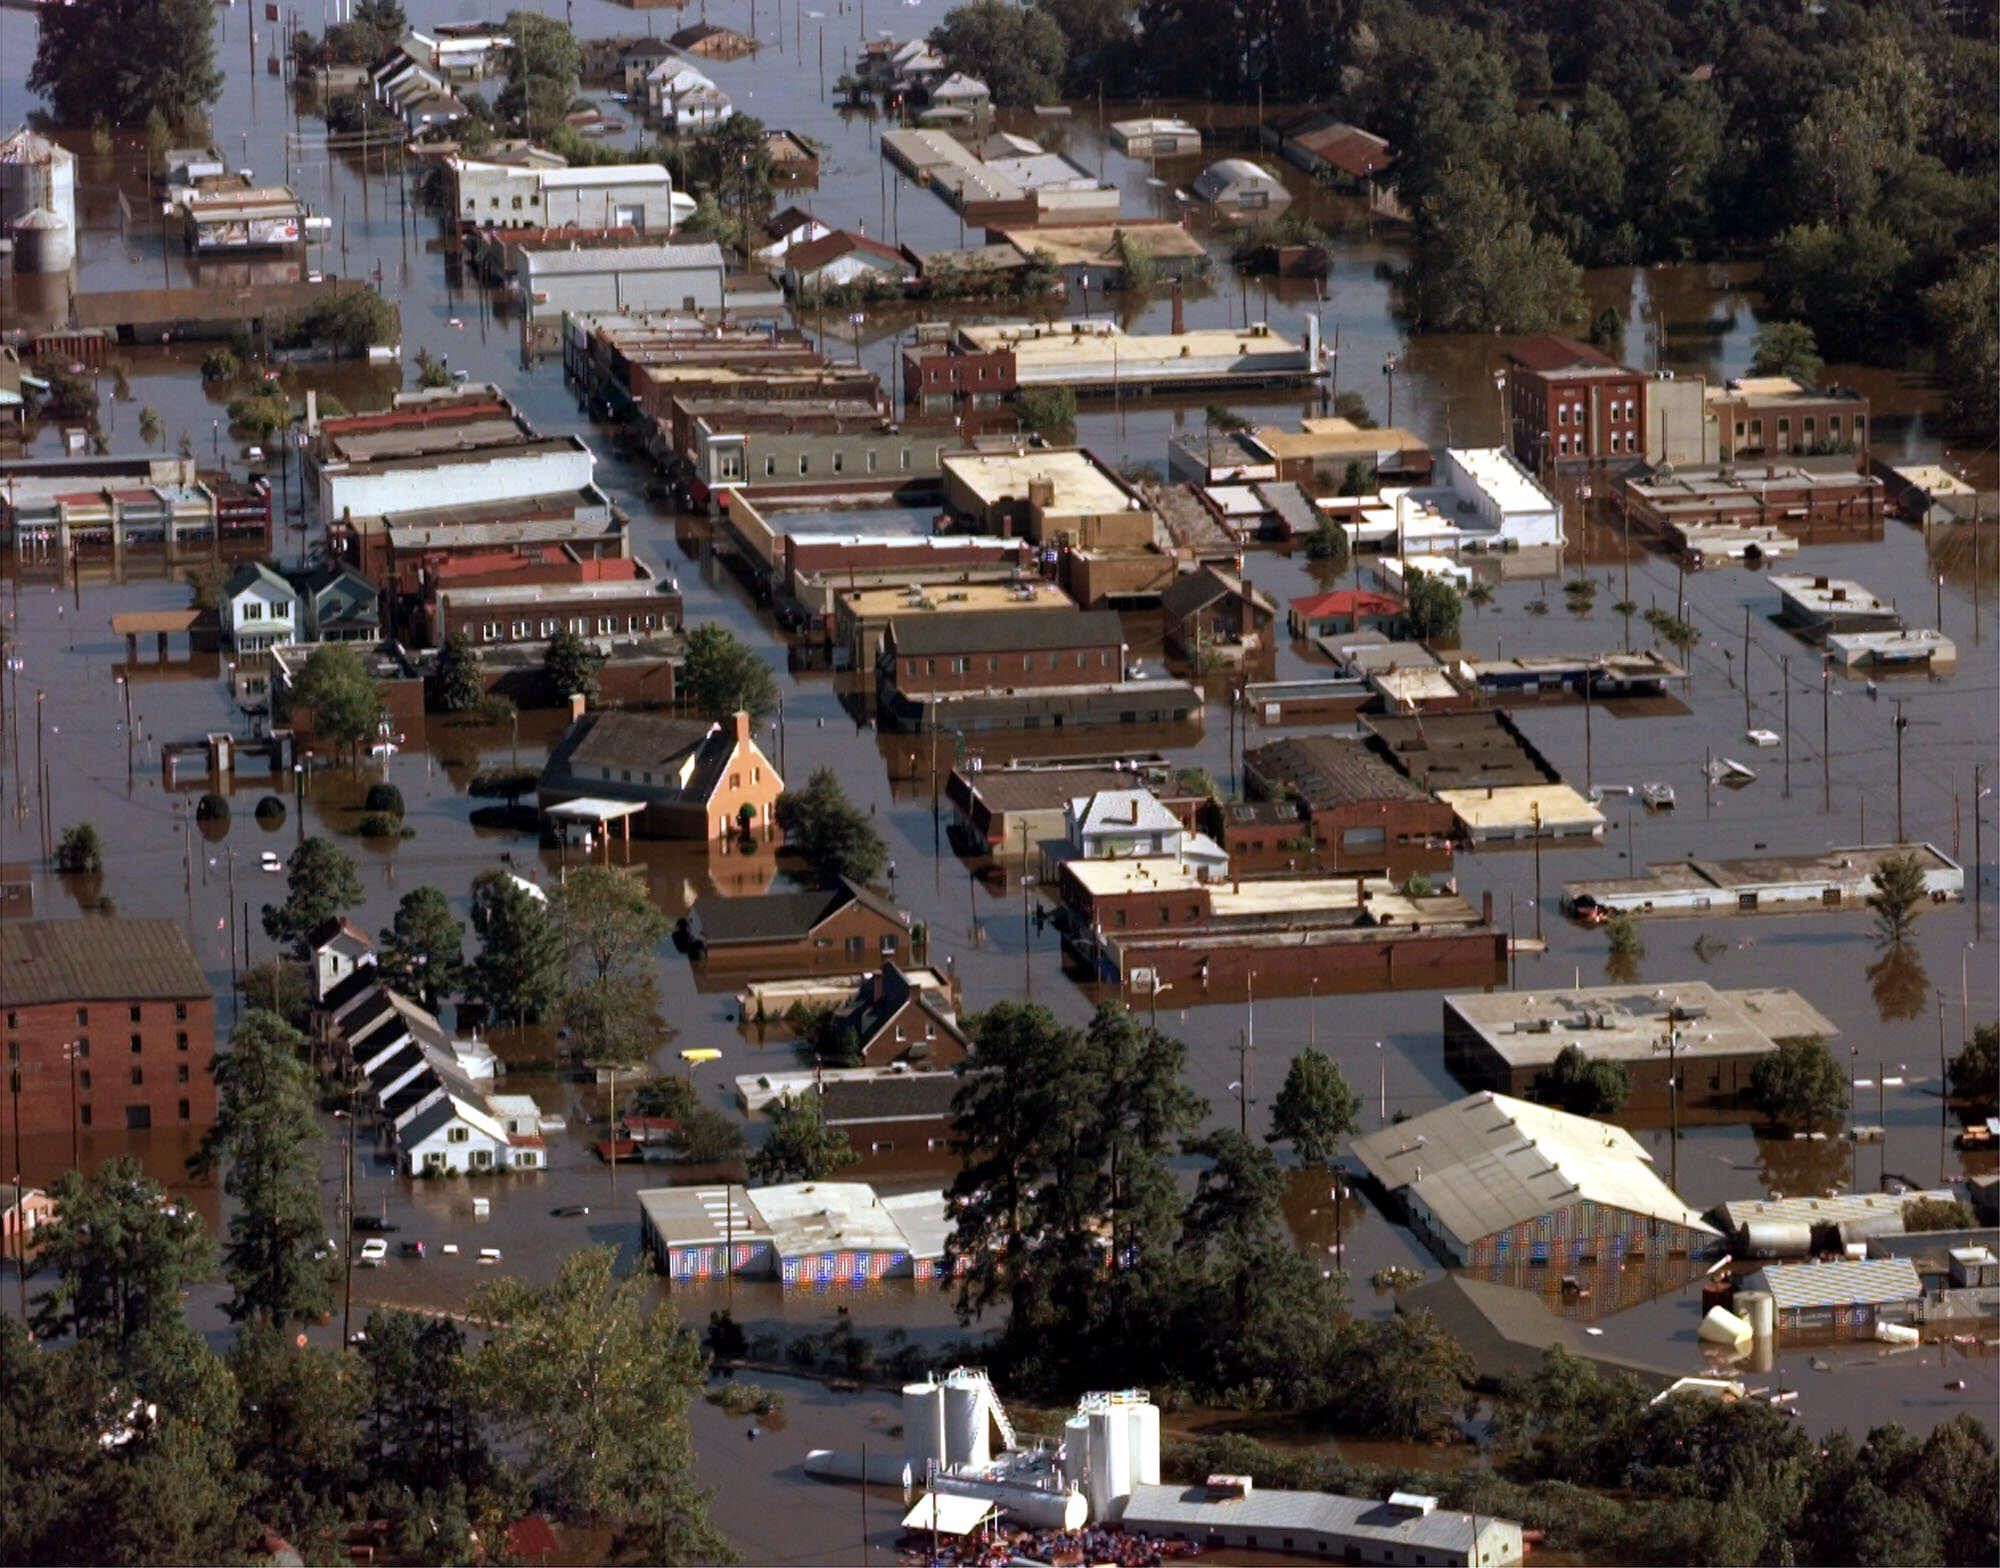 PHOTOS: Looking back at Hurricane Floyd’s destruction, 20 years later